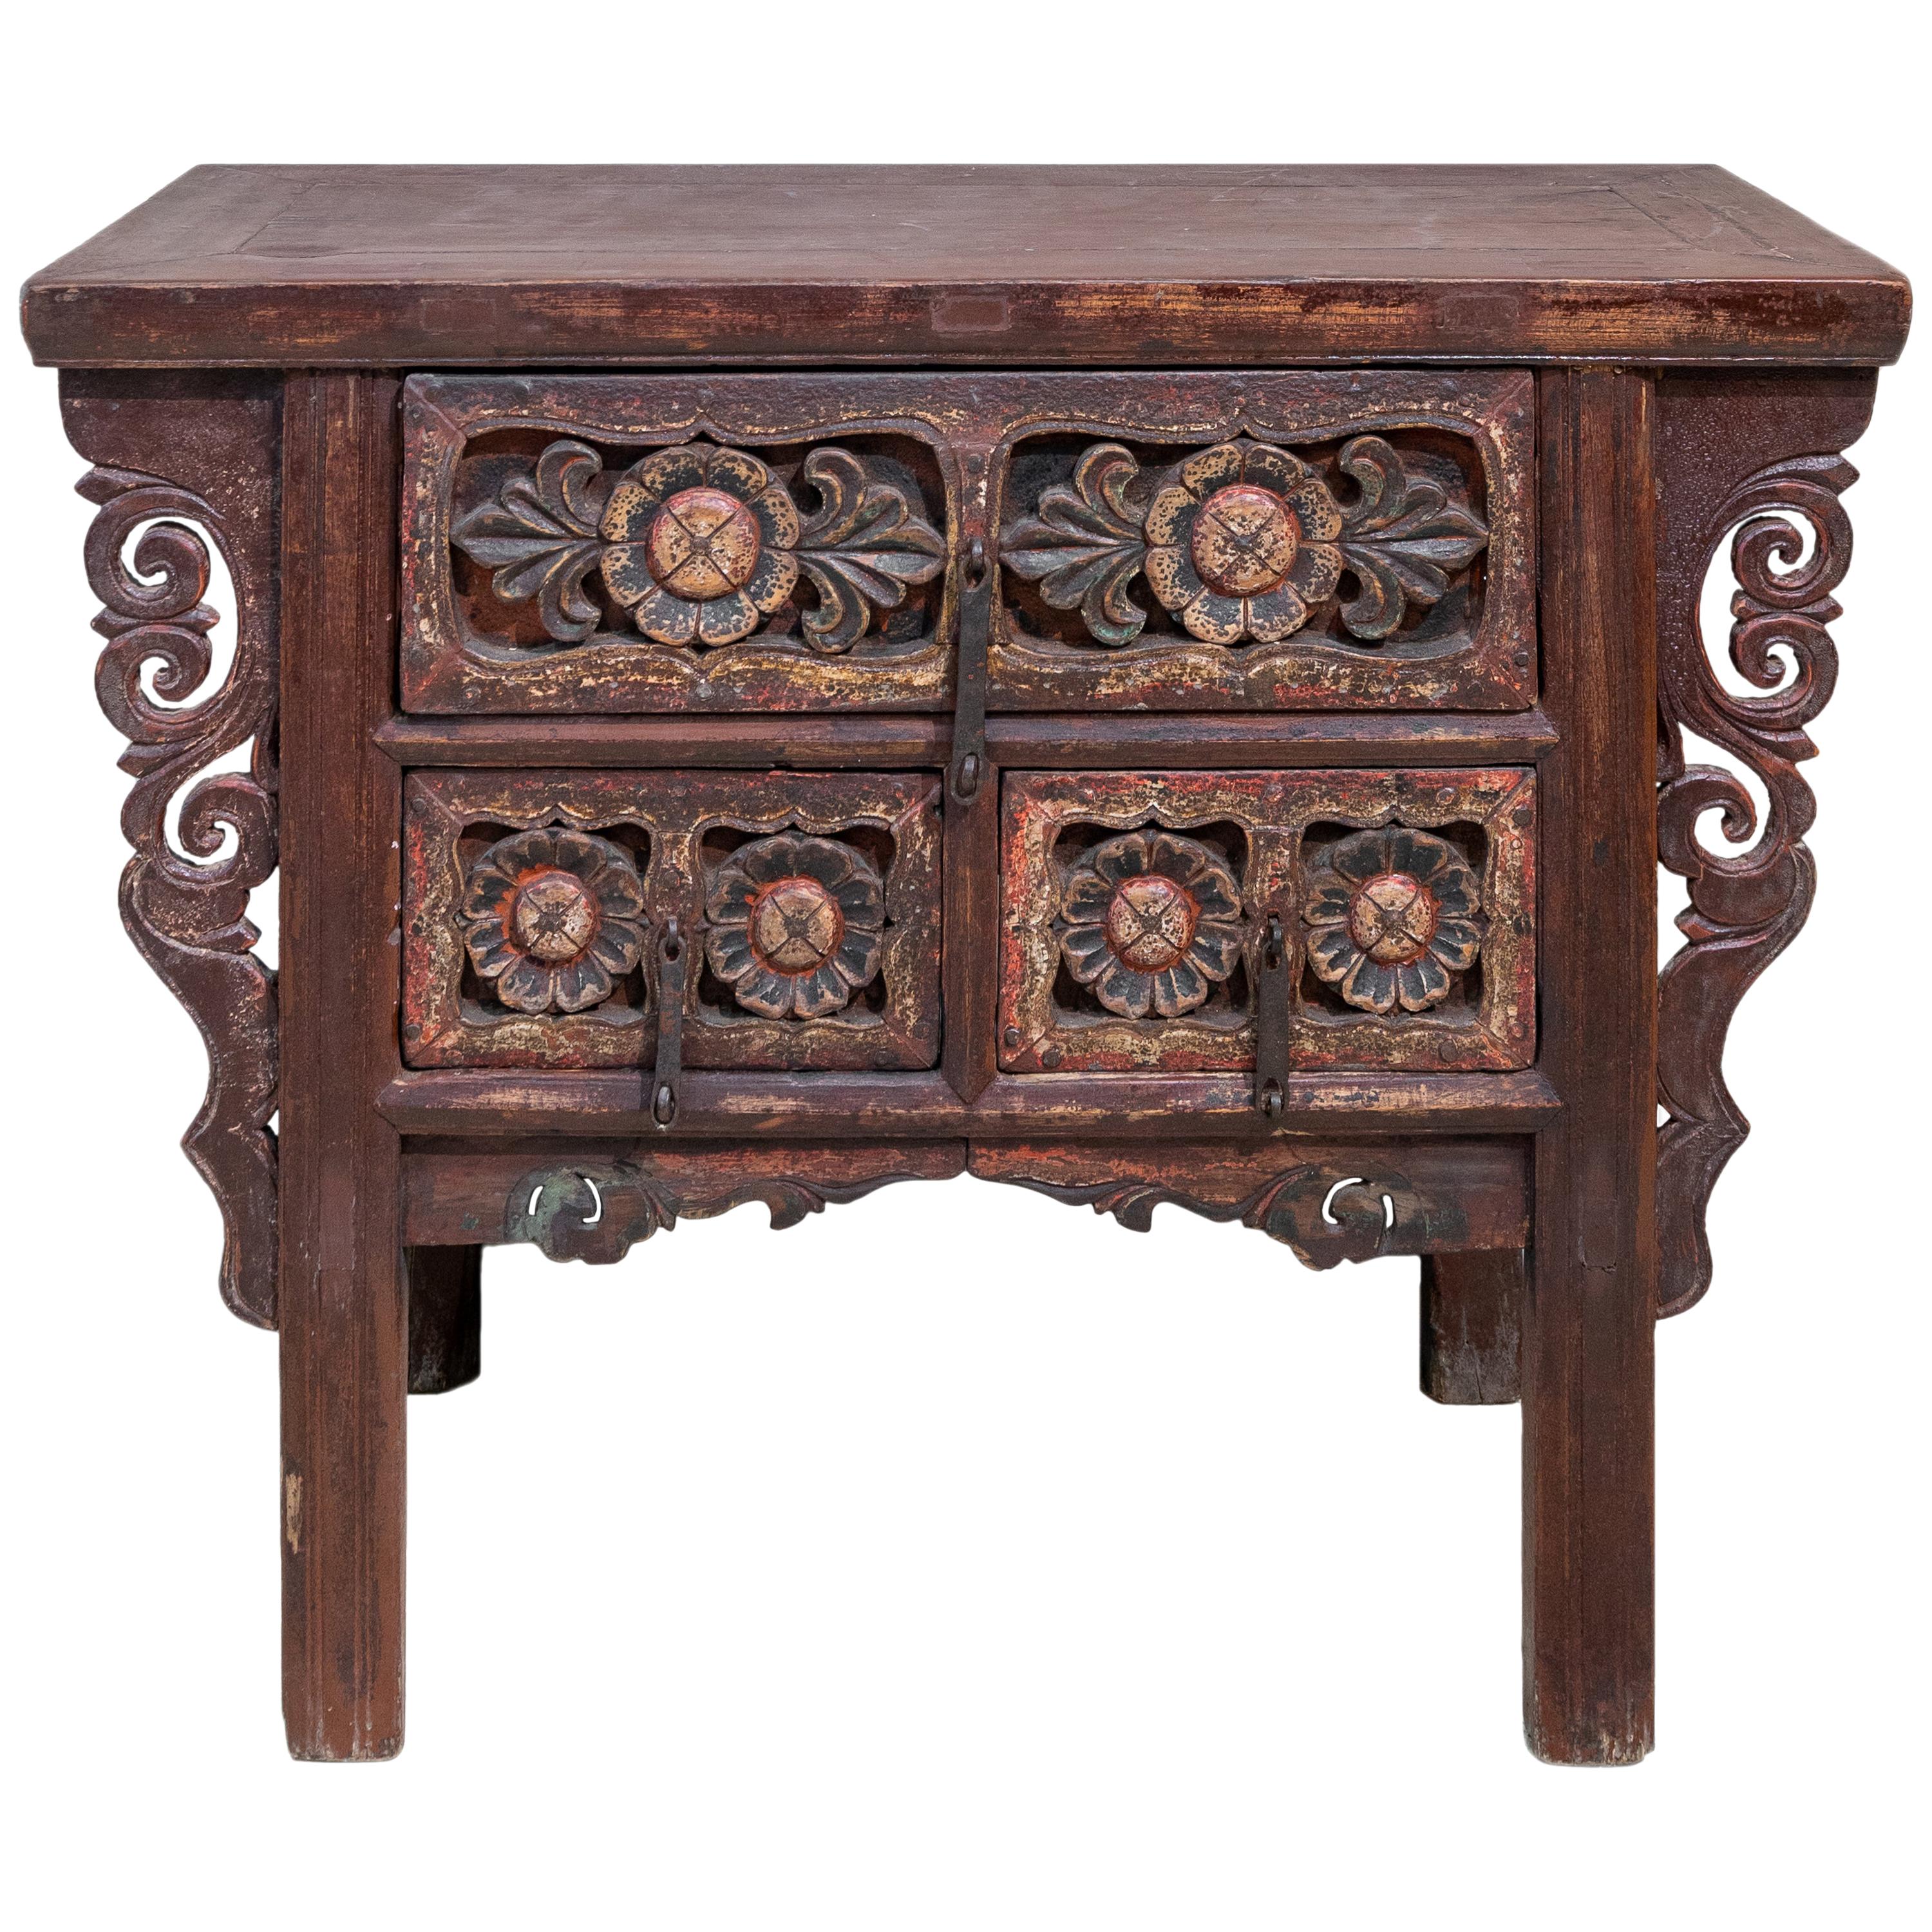 Mid-19th Century Carved Coffer Table from Shanxi, China